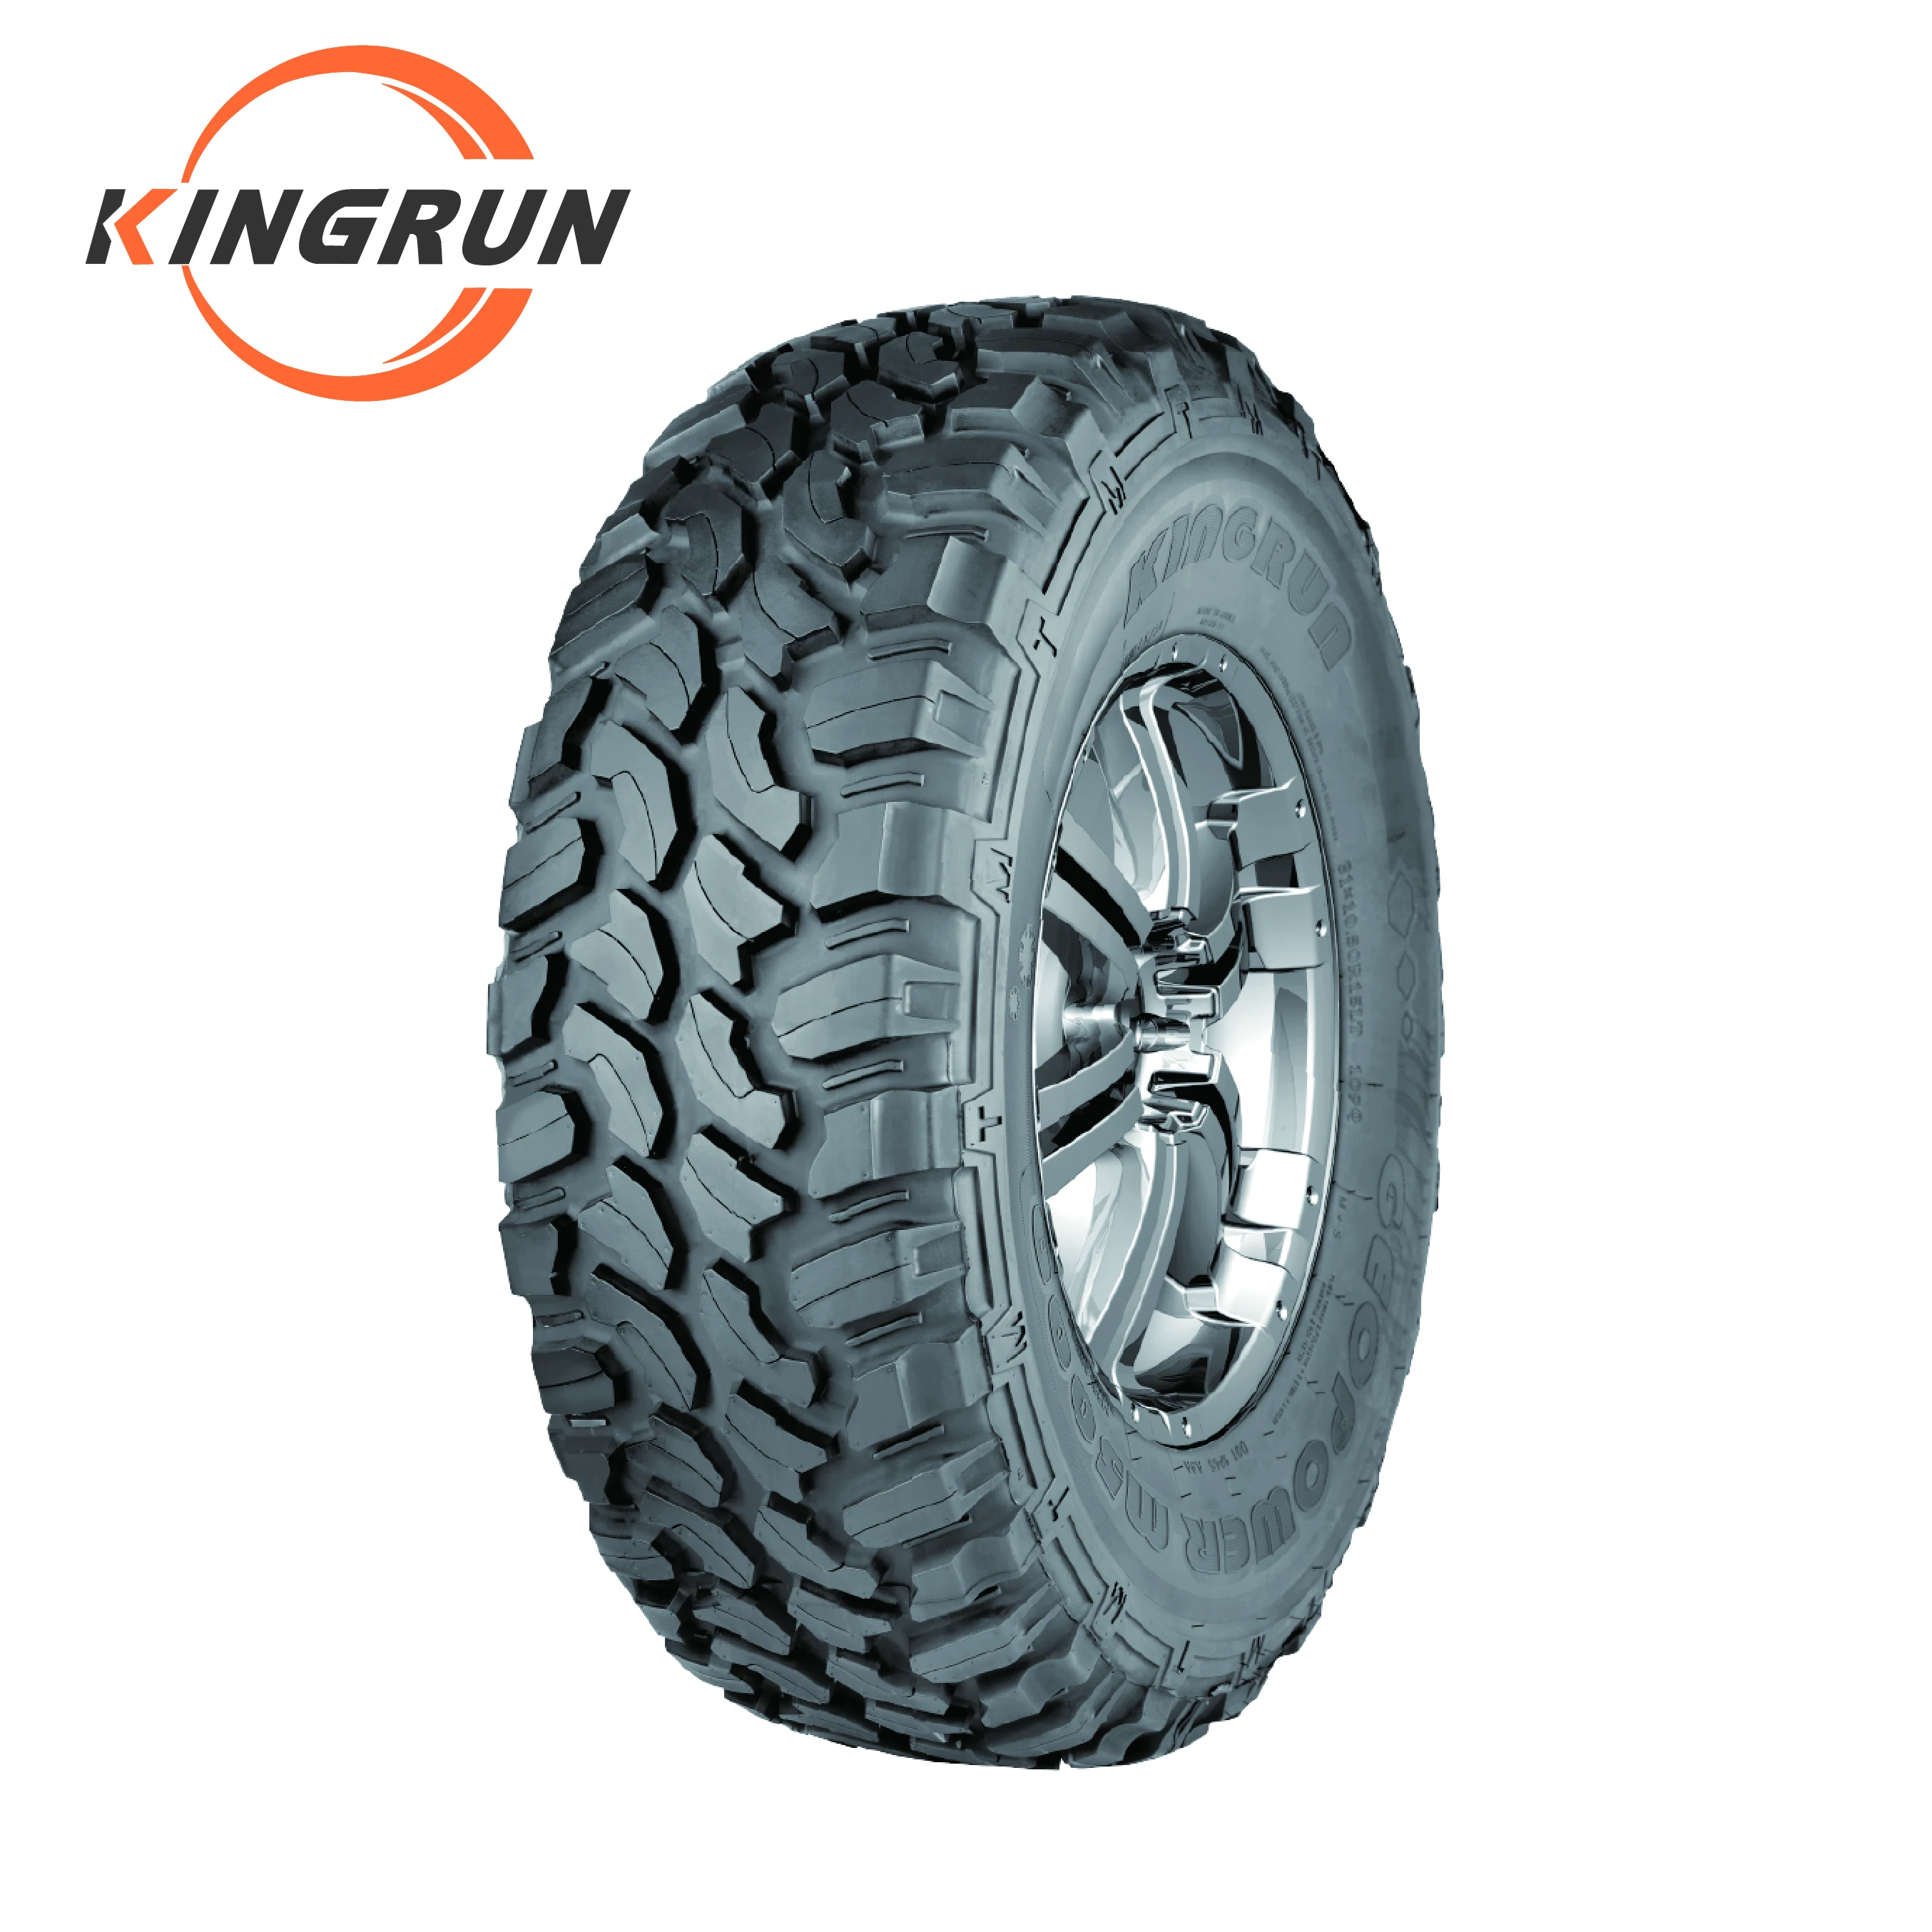 Kingrun Tyres 155 70r13 215 70r14 215 65r15 215 65r16 235 60r16 View Kingrun Tyres Kingrun Bestrich Product Details From Shandong Transtone Tyre Co Ltd On Alibaba Com